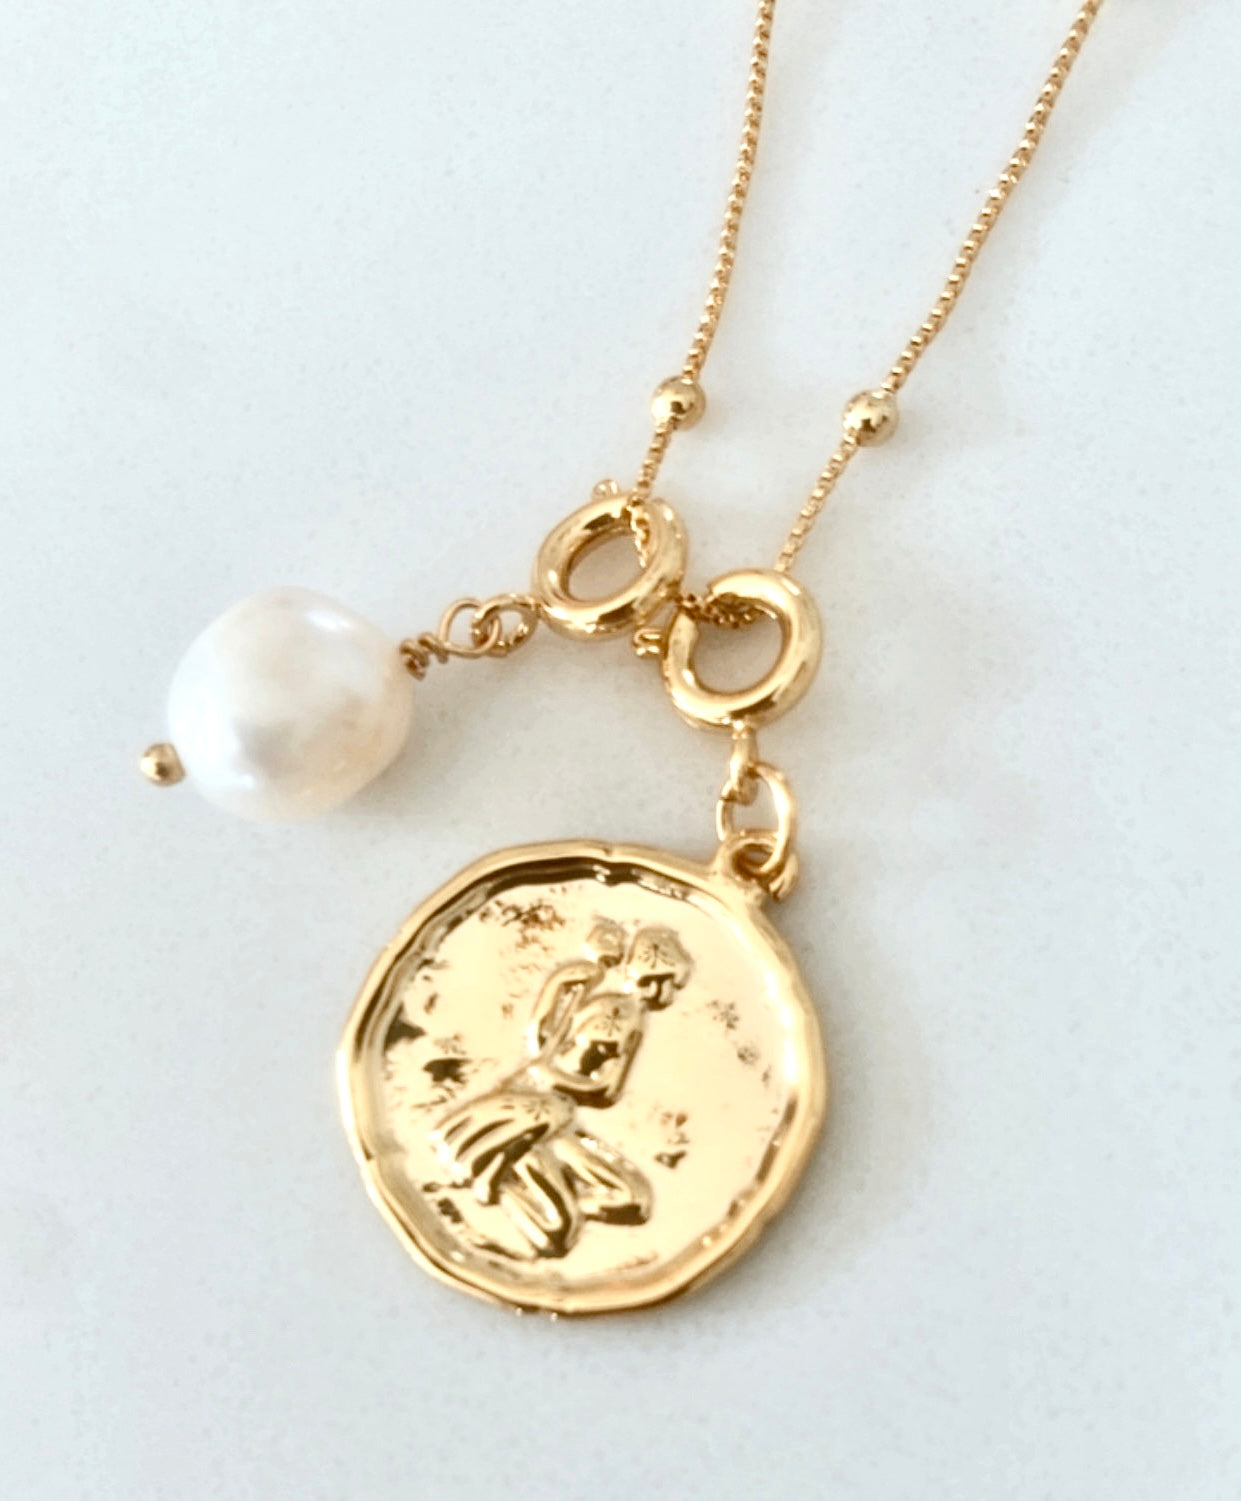 Zodiac with Freshwater Pearl - Virgo Aug 22 - Sept 23